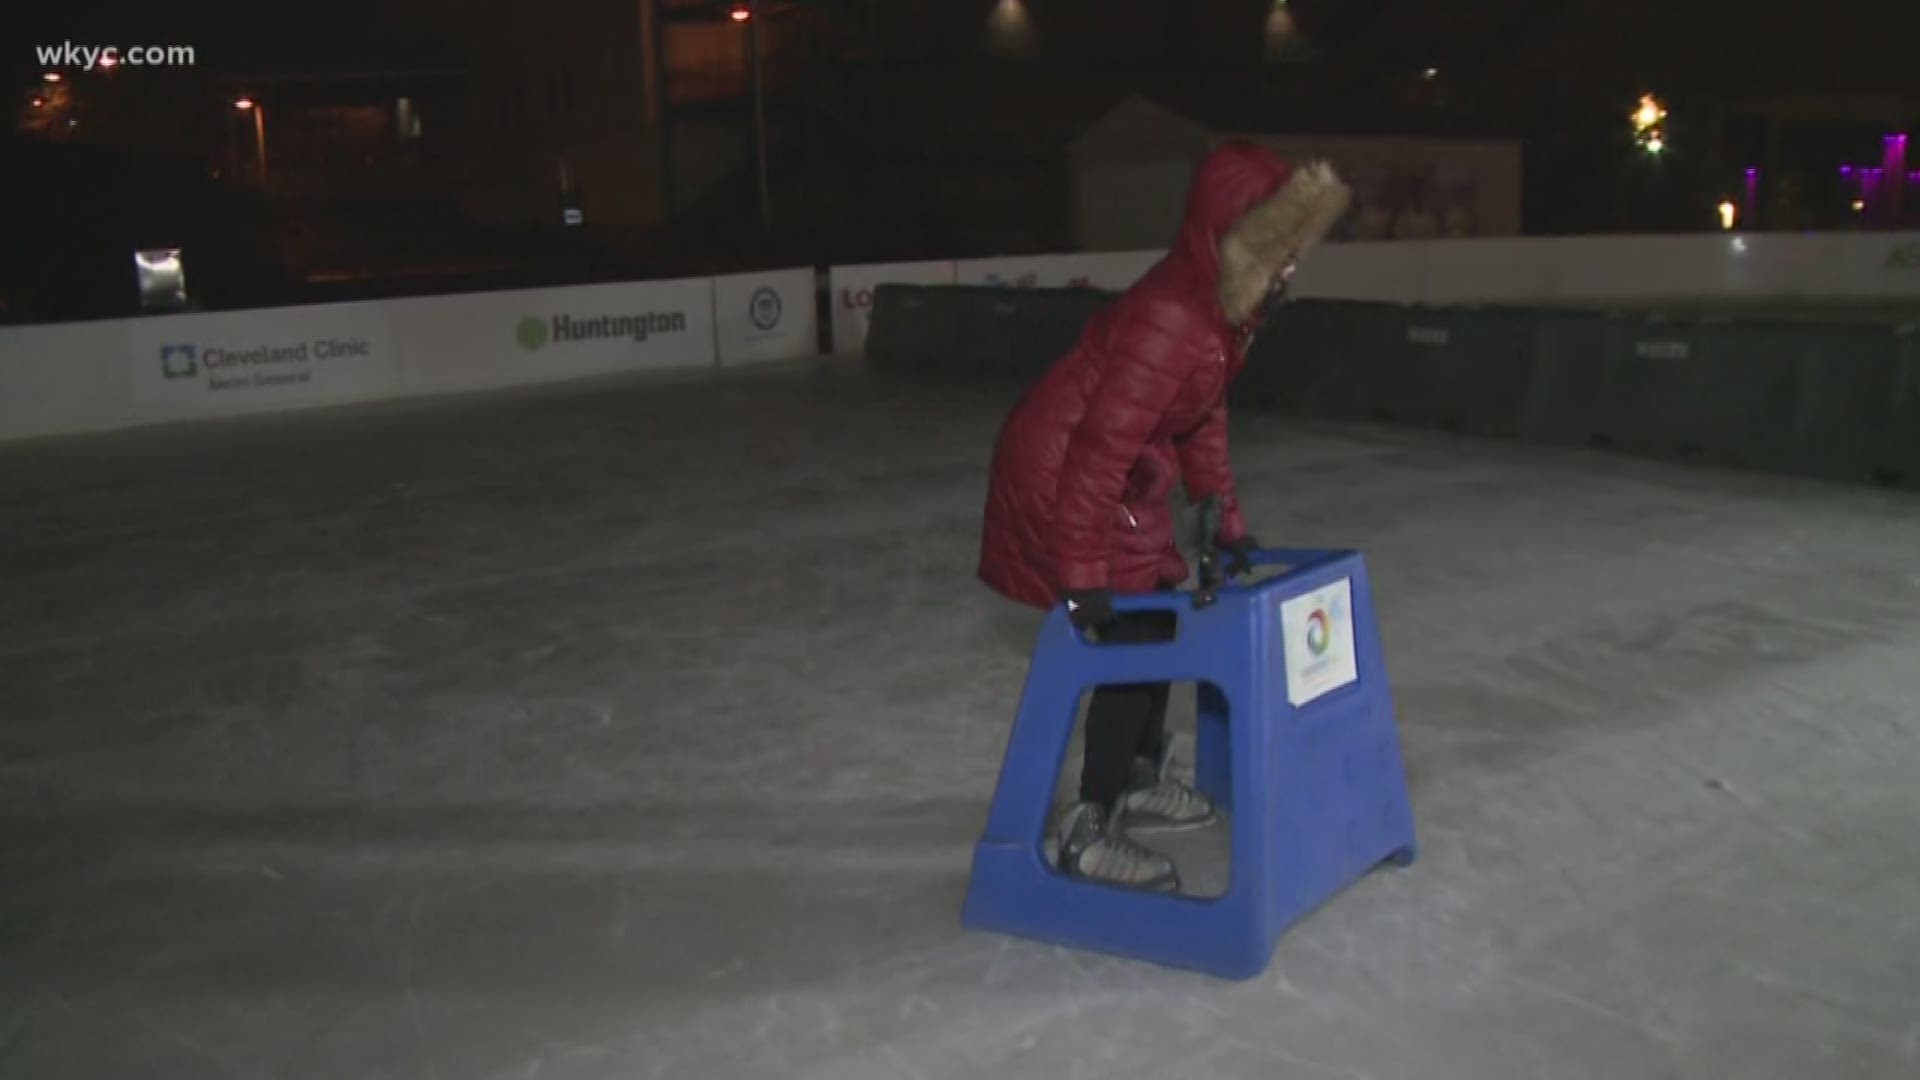 Dec. 12, 2018: If you're looking for something fun to do this winter, just drop by Lock 3 in Akron. Ice bumper cars are now available for some fun on the skating rink.